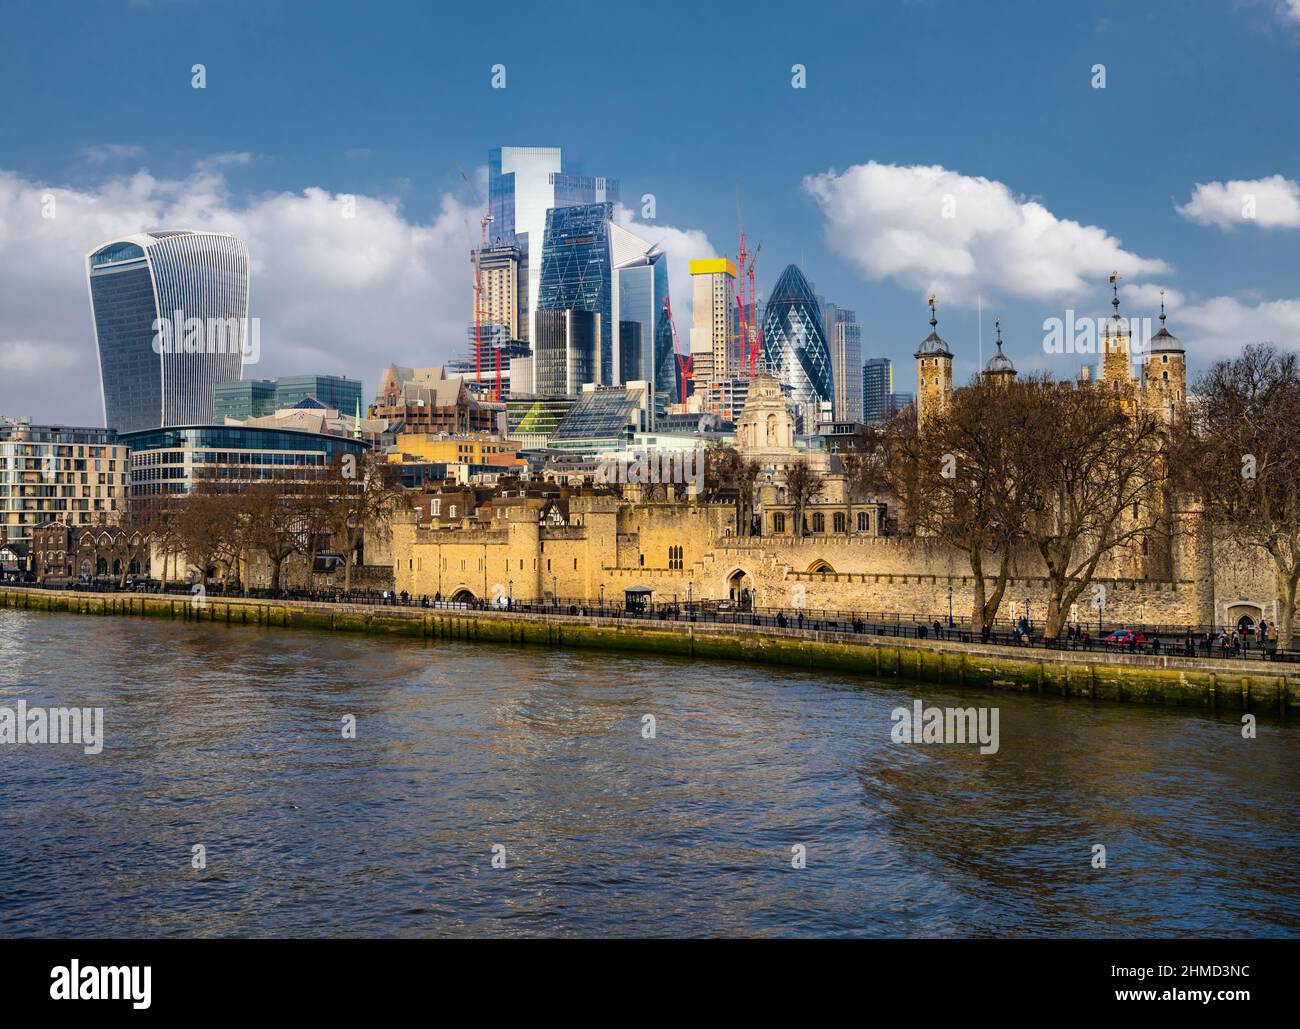 High res 102MP, Tower of London and City of London, Gherkin, Cheesegratter, The Leadenhall Building, Walkie Talkie, 20 Fenchurch Street. 8 Bishopgate. Stock Photo